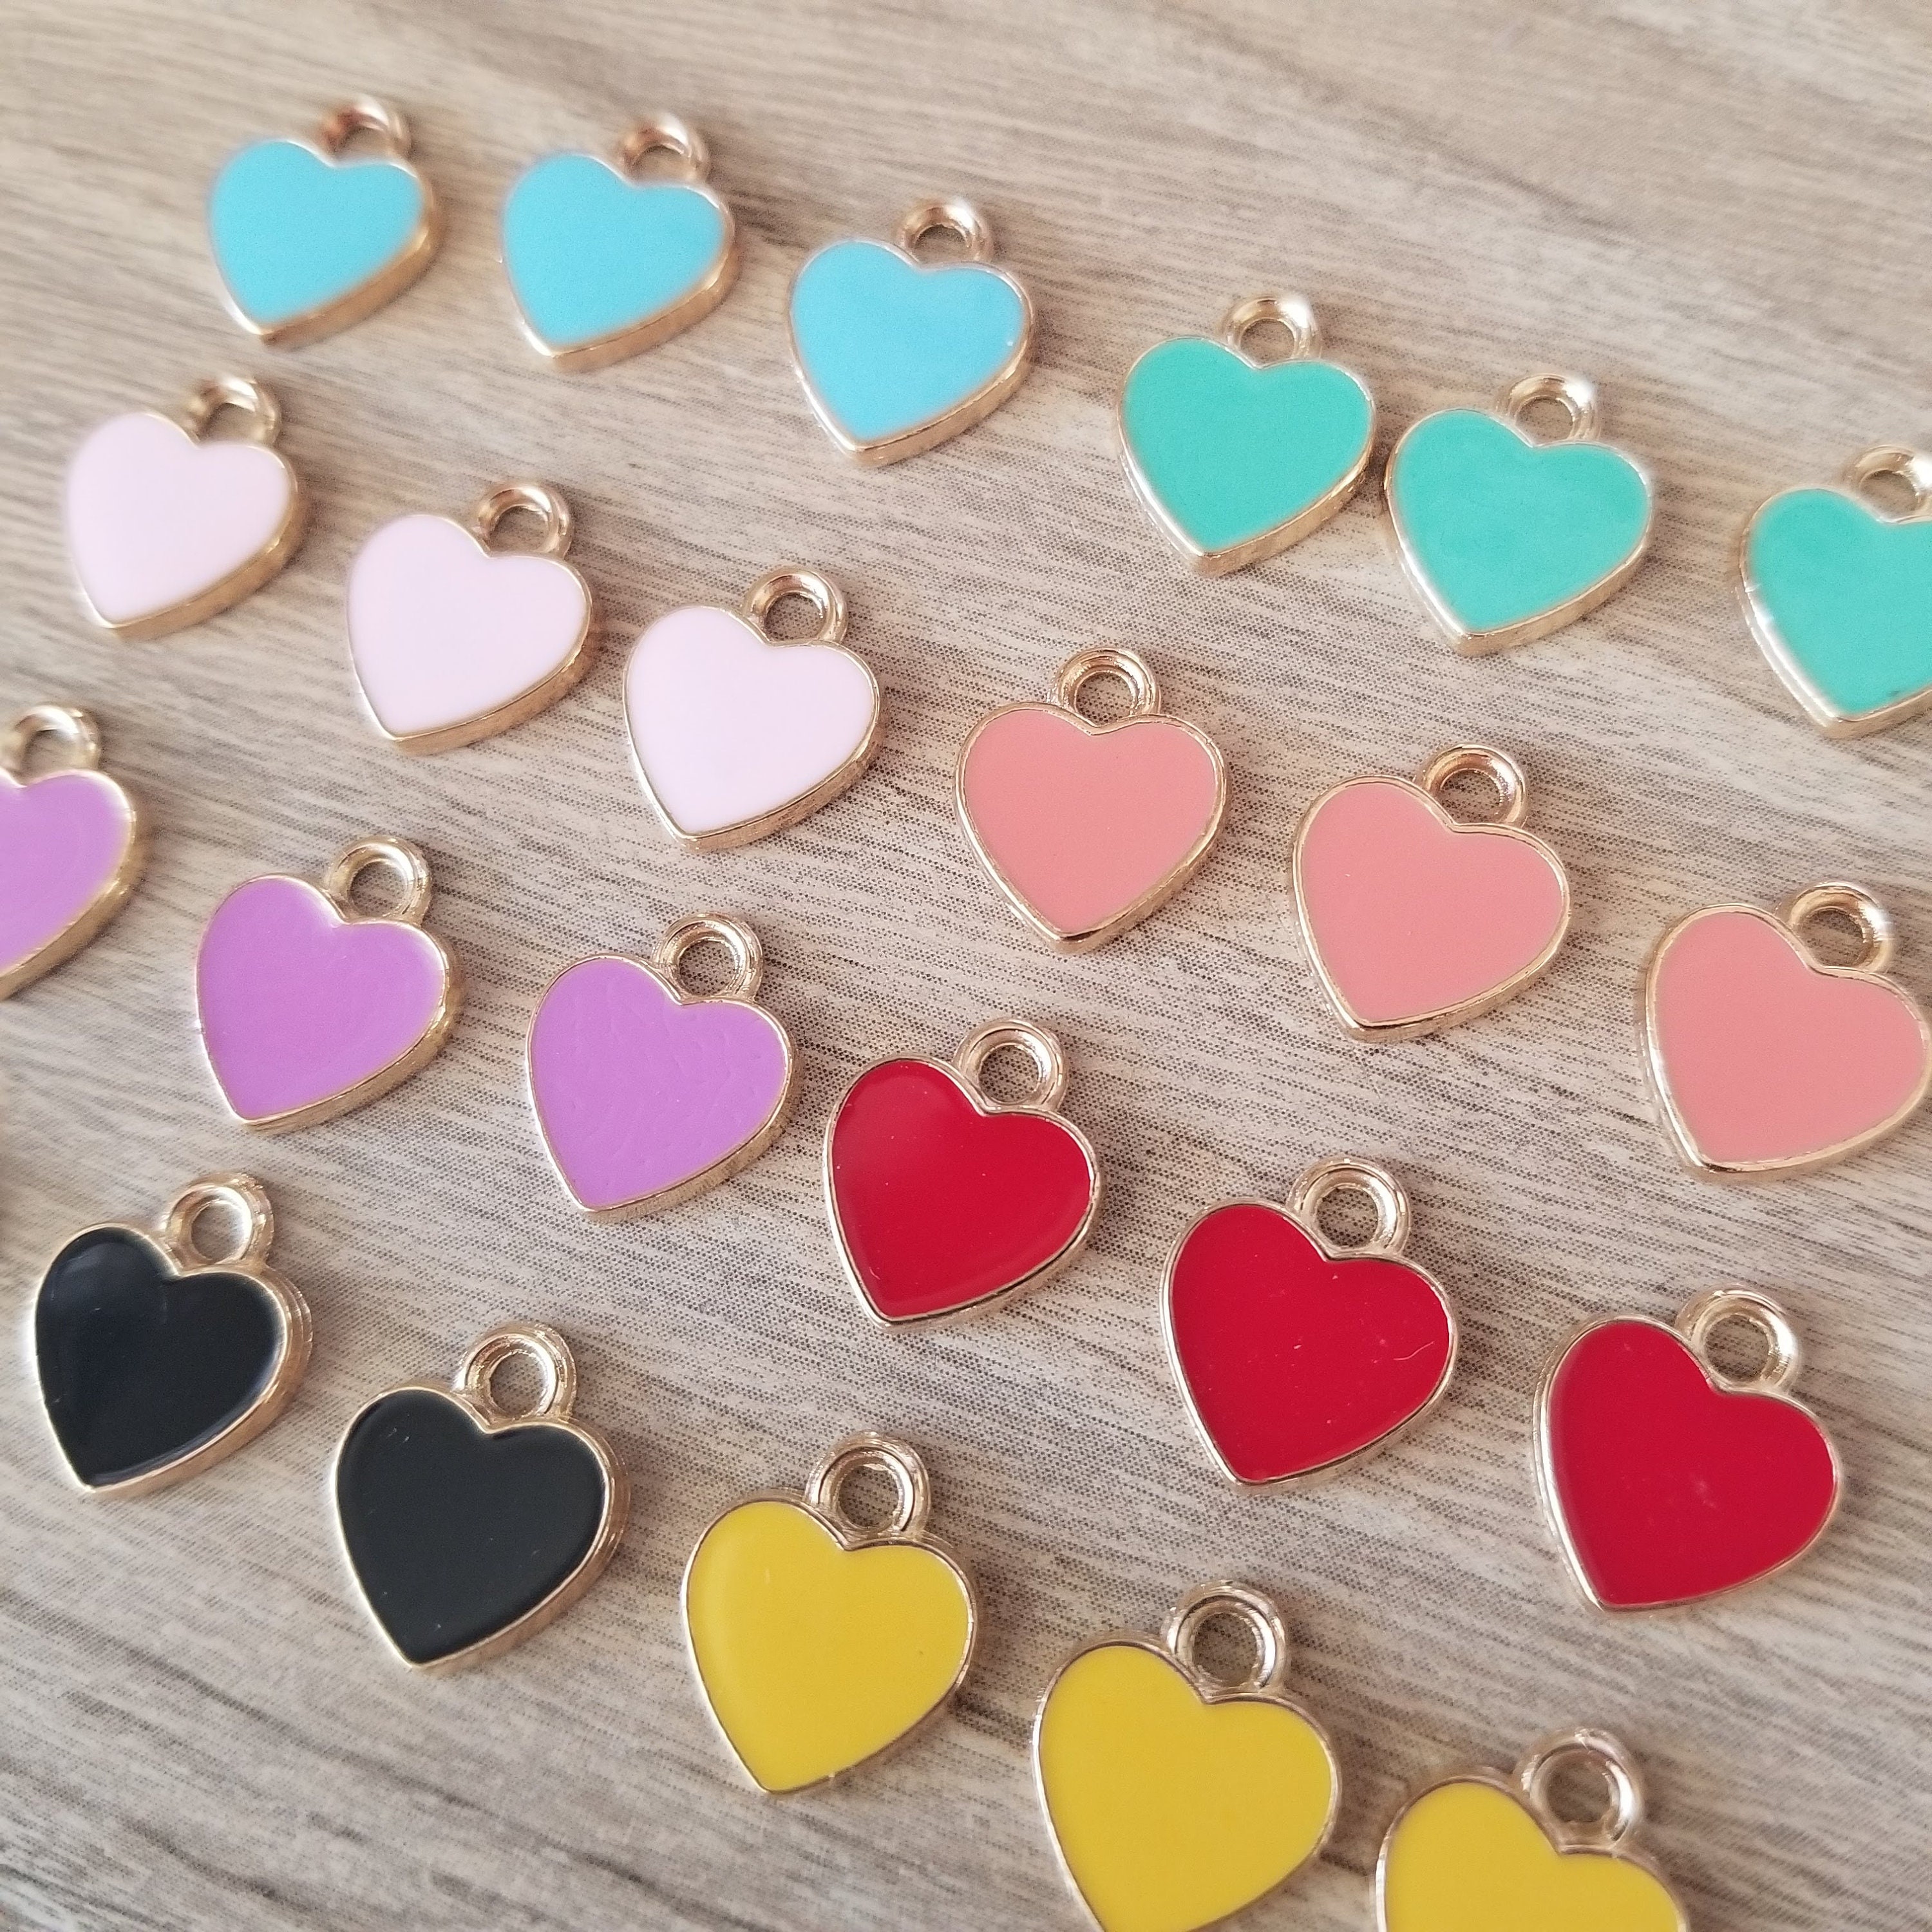 DICOSMETIC 44pcs 11 Colors Stainless Steel Heart Shape Enamel Charms Colorful Metal Heart Charms Mini Heart Beads Enamel Charms